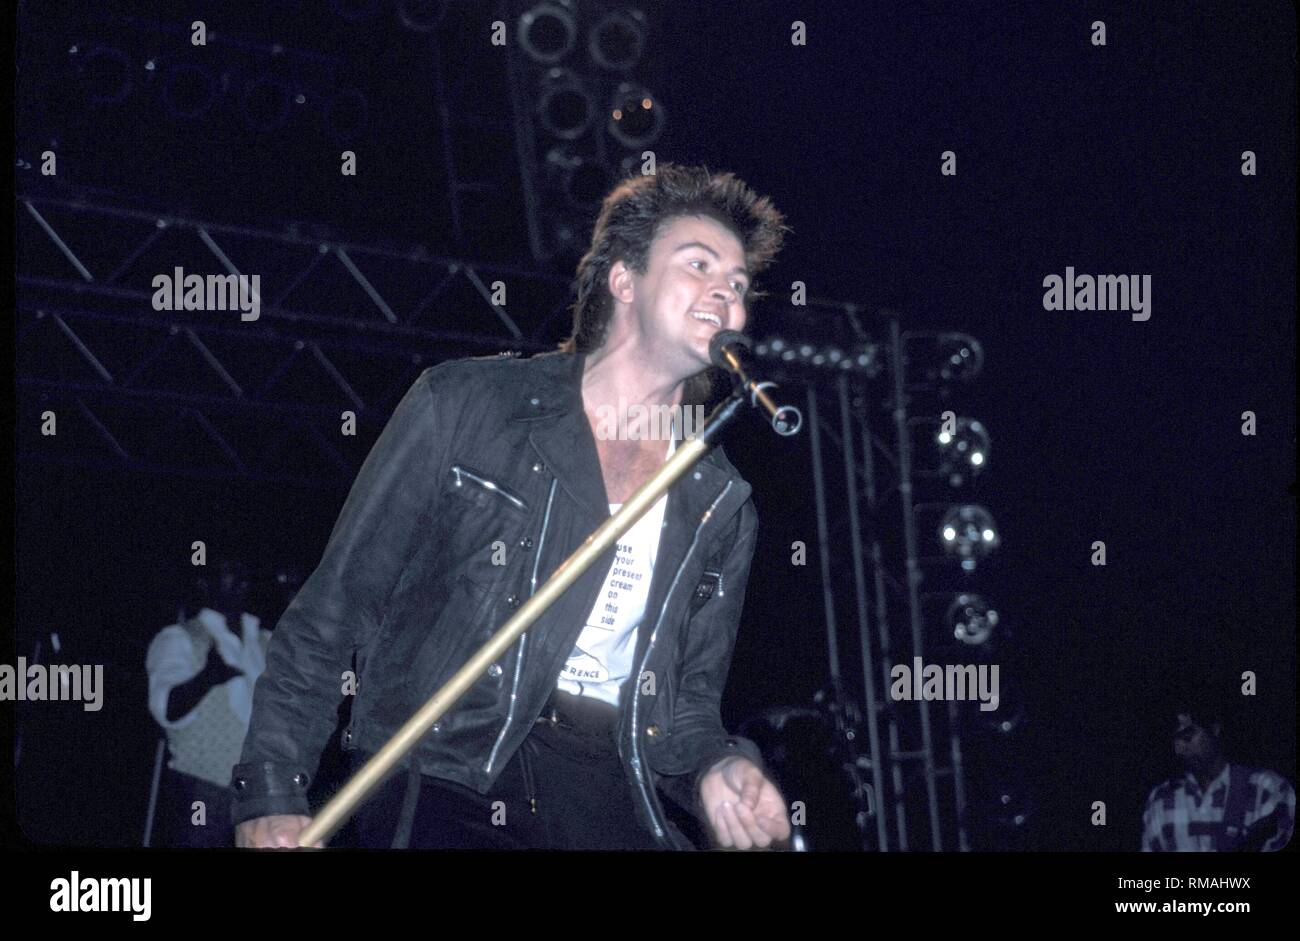 English pop singer Paul Young is shown performing on stage during a 'live' concert appearance. Stock Photo